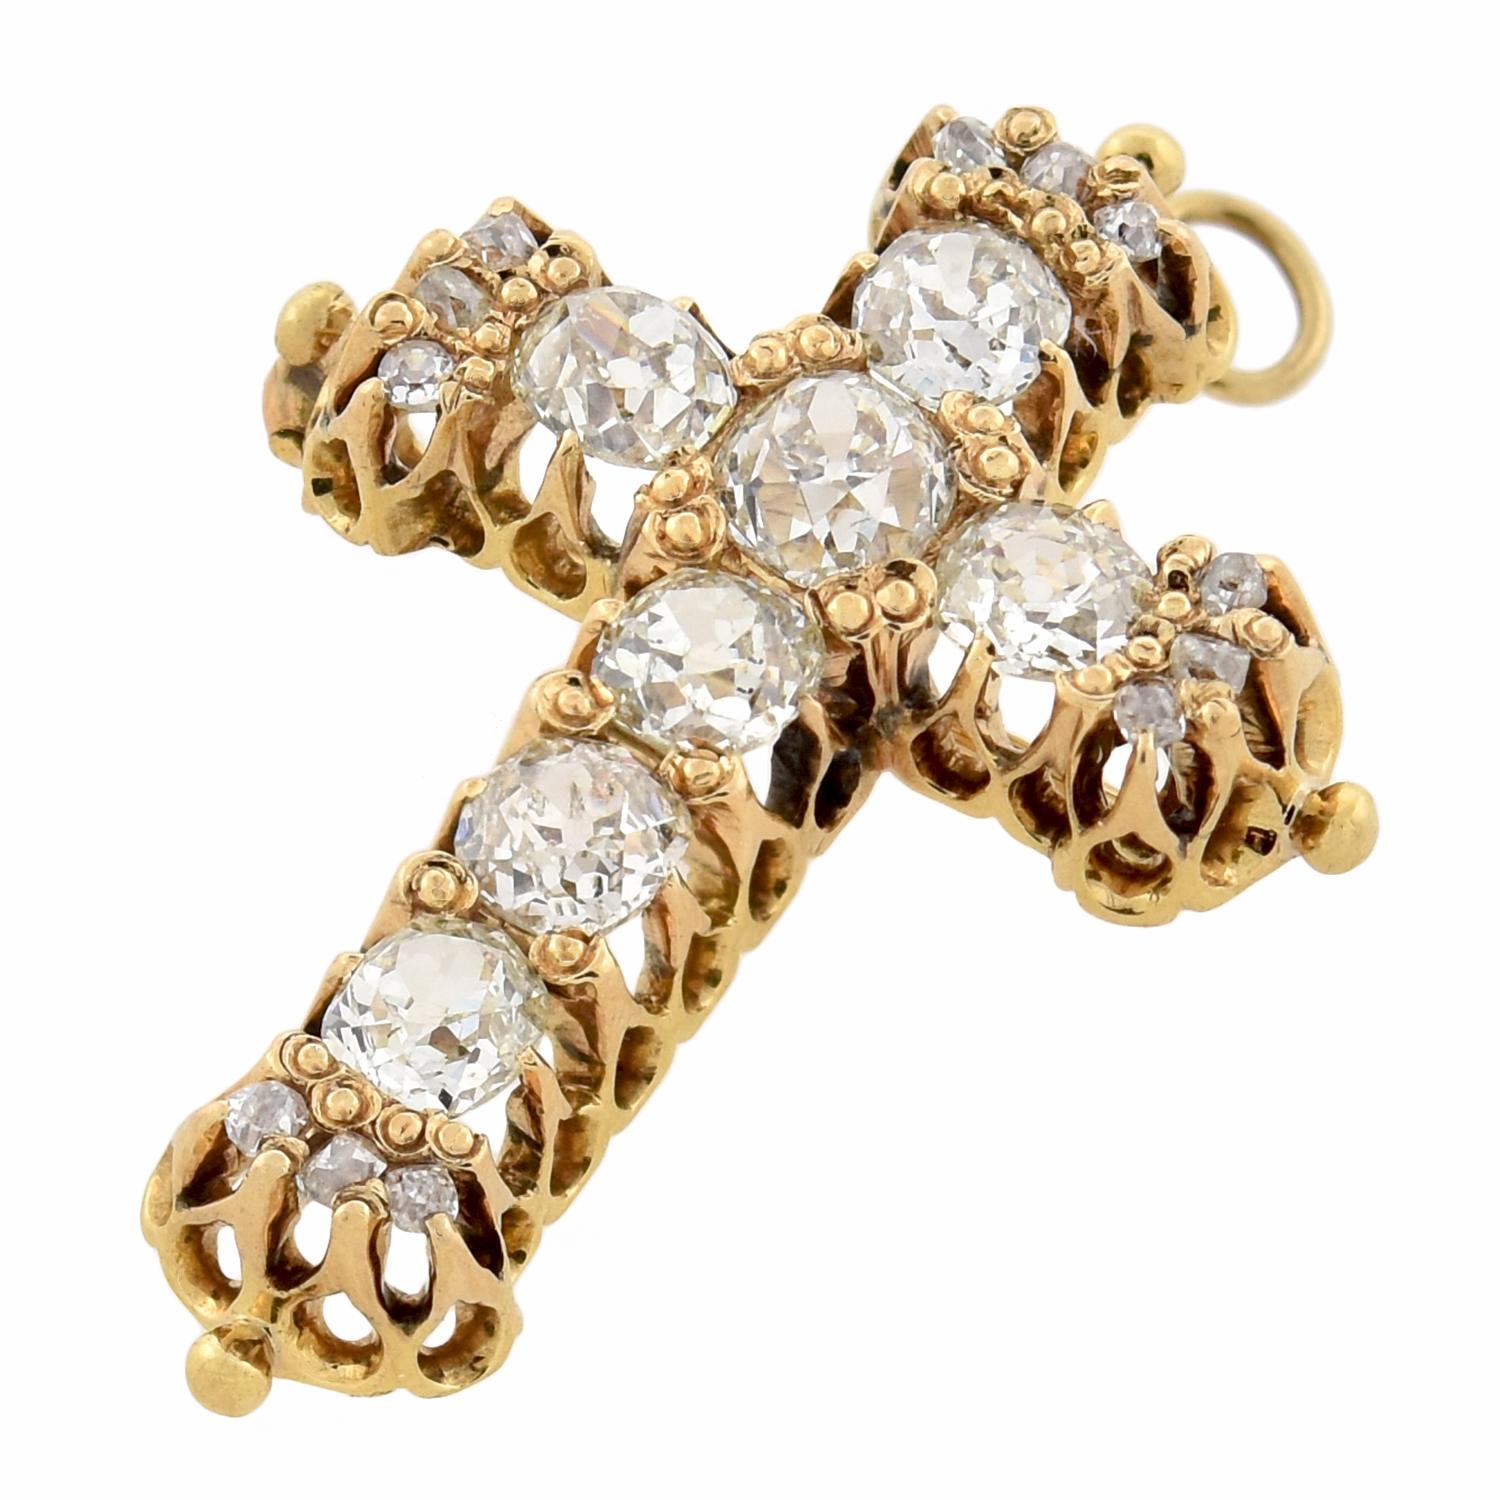 An absolutely stunning diamond cross from the Victorian (ca1880s) era! Crafted in rich 18kt yellow gold, this jaw dropping piece features seven substantially sized diamonds which line the front of the cross, which can easily be worn as a brooch or